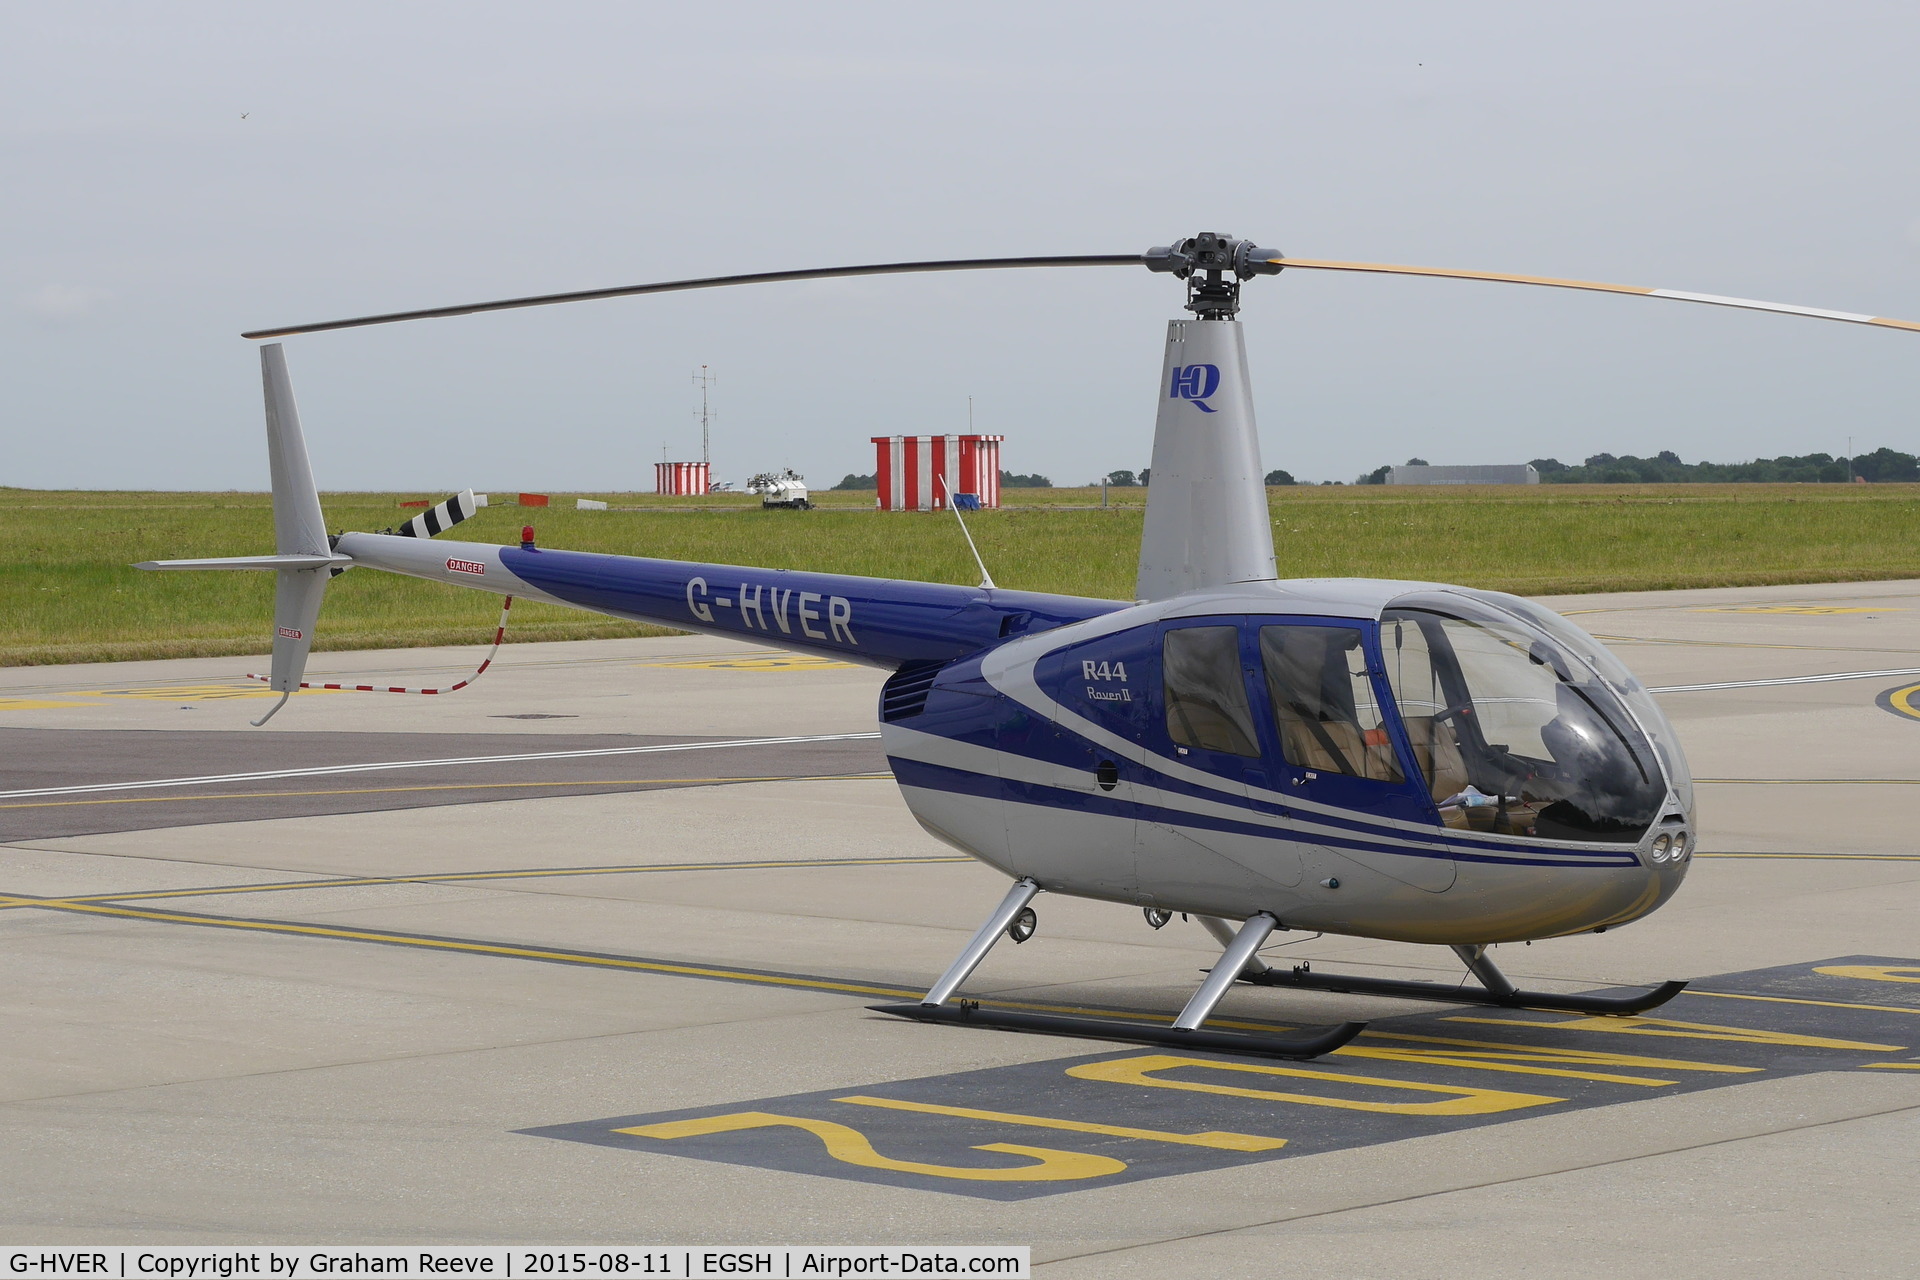 G-HVER, 2007 Robinson R44 Raven II C/N 11754, Parked at Norwich.